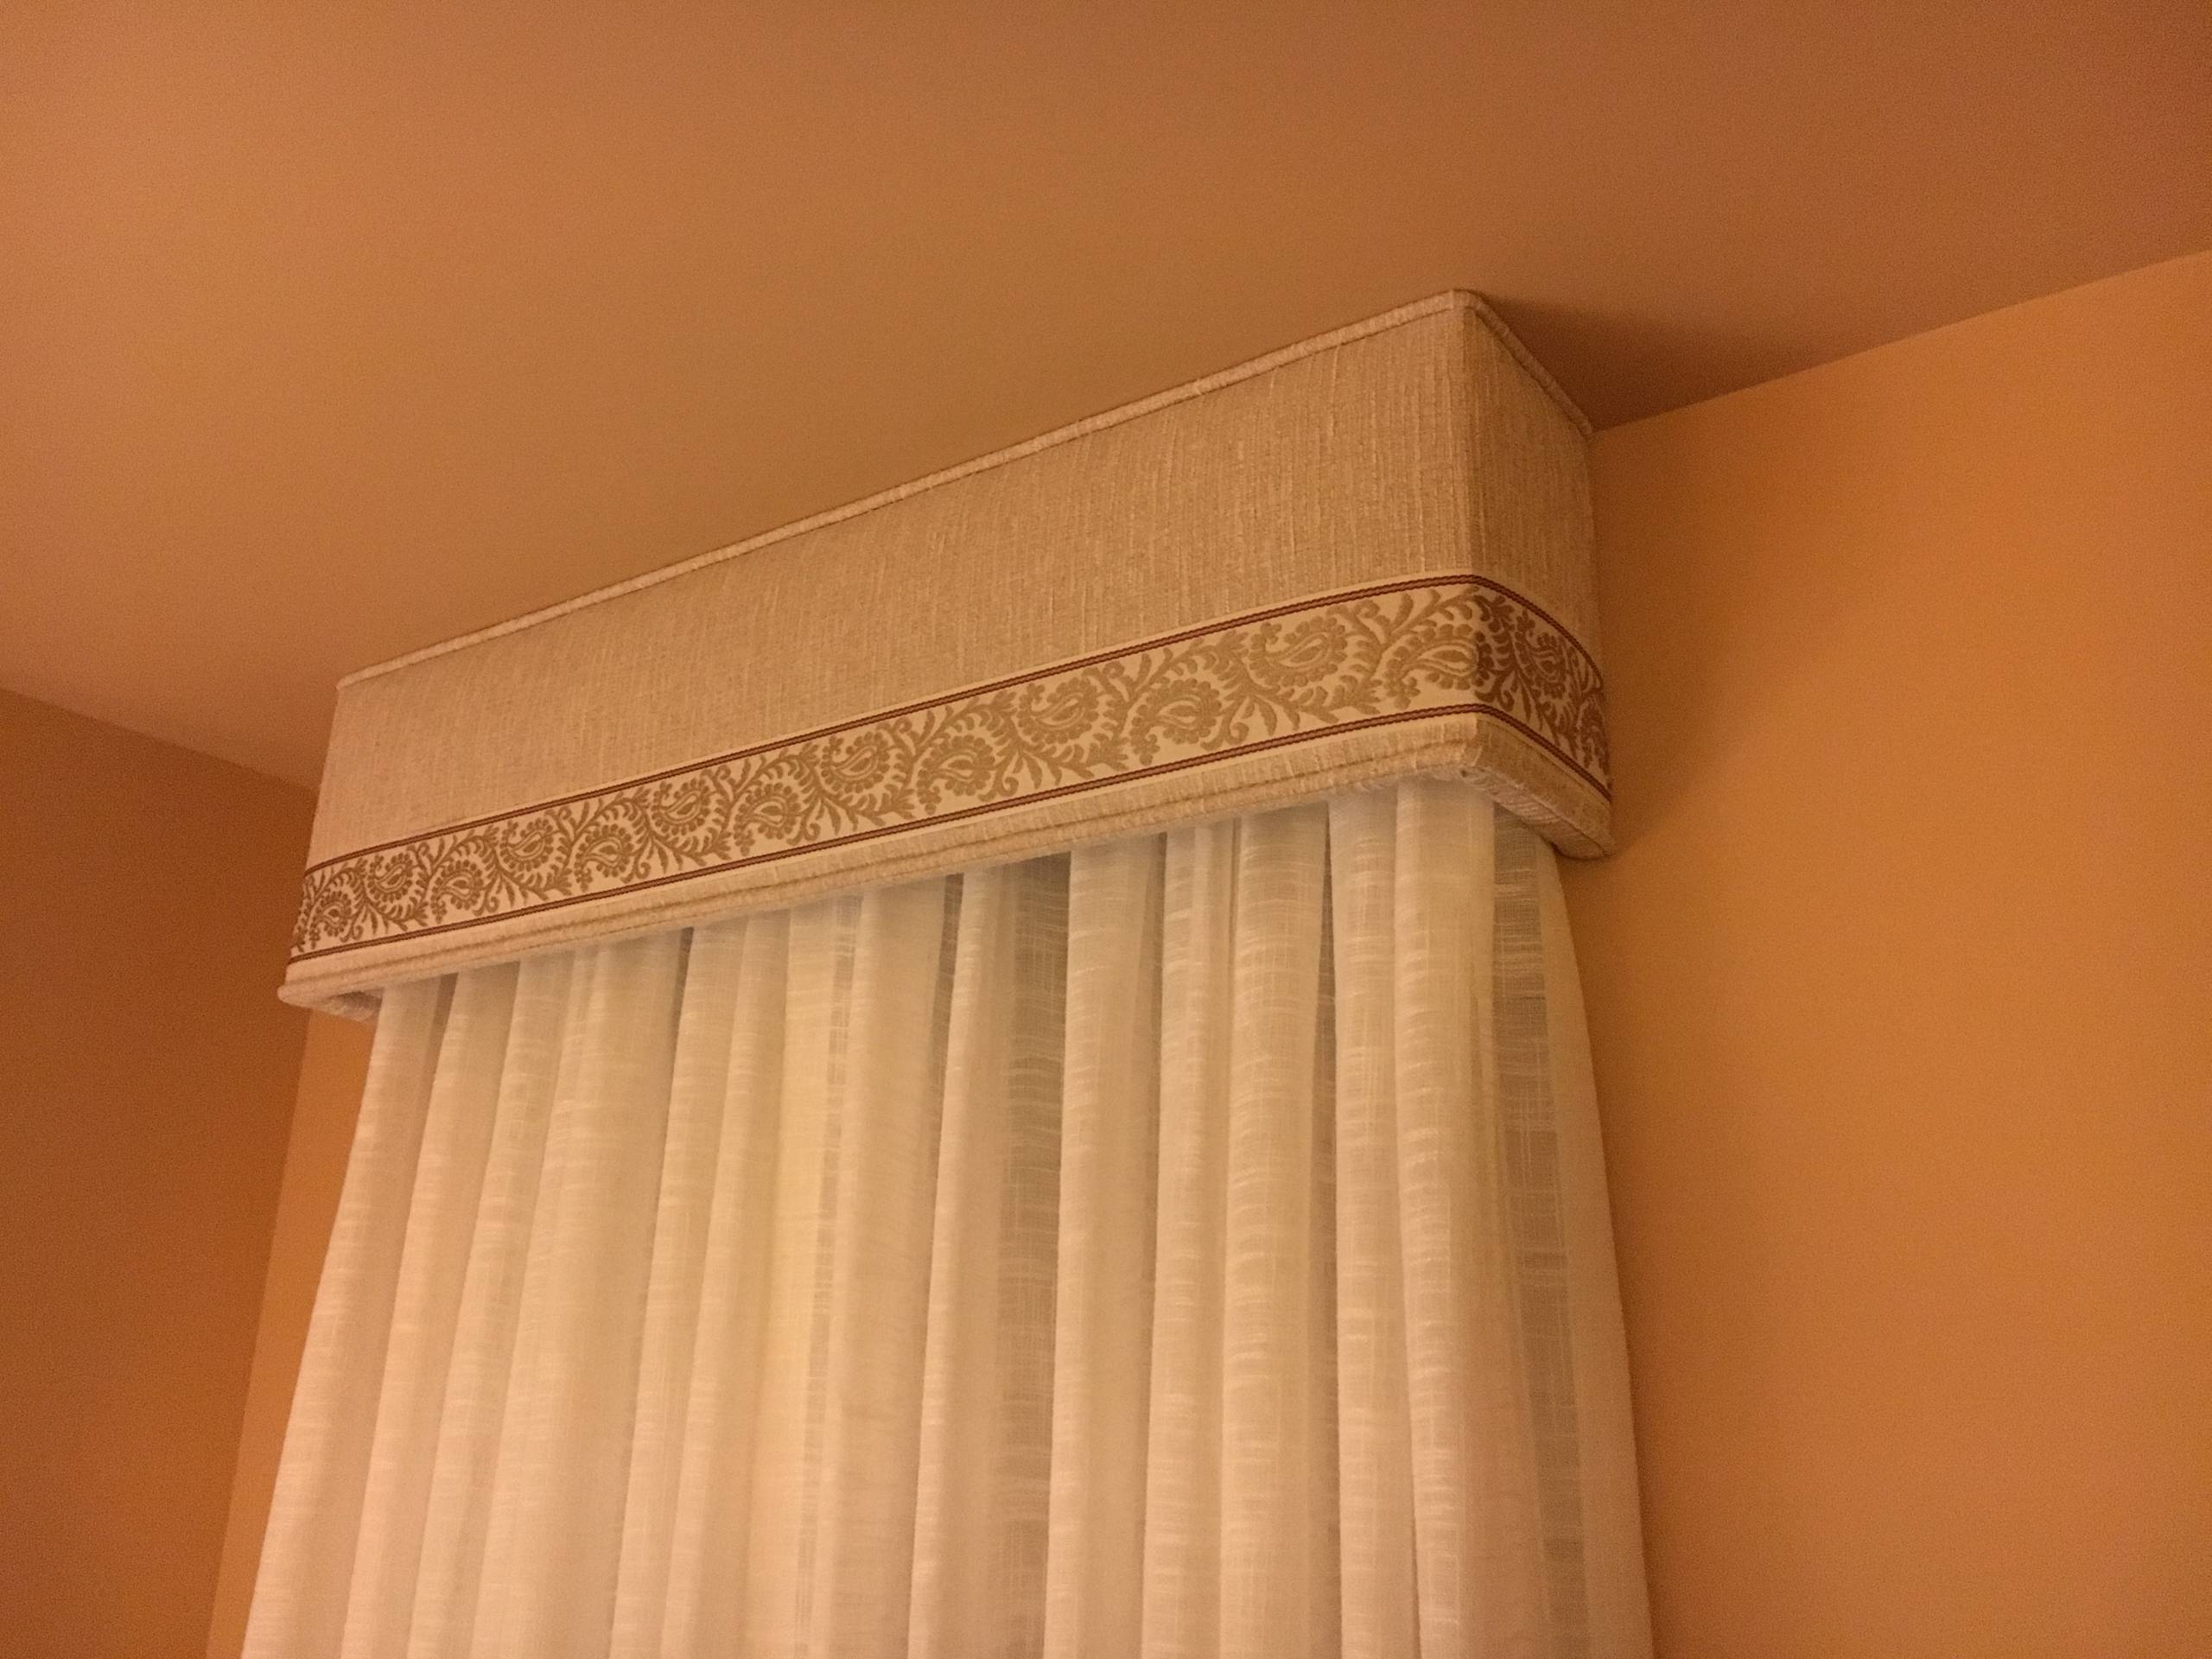 Cornices for the Condo, wallpaper, and other decorative touches -  Transitional - Home Office - DC Metro - by Masterworks Window Fashions &  Design, LLC | Houzz